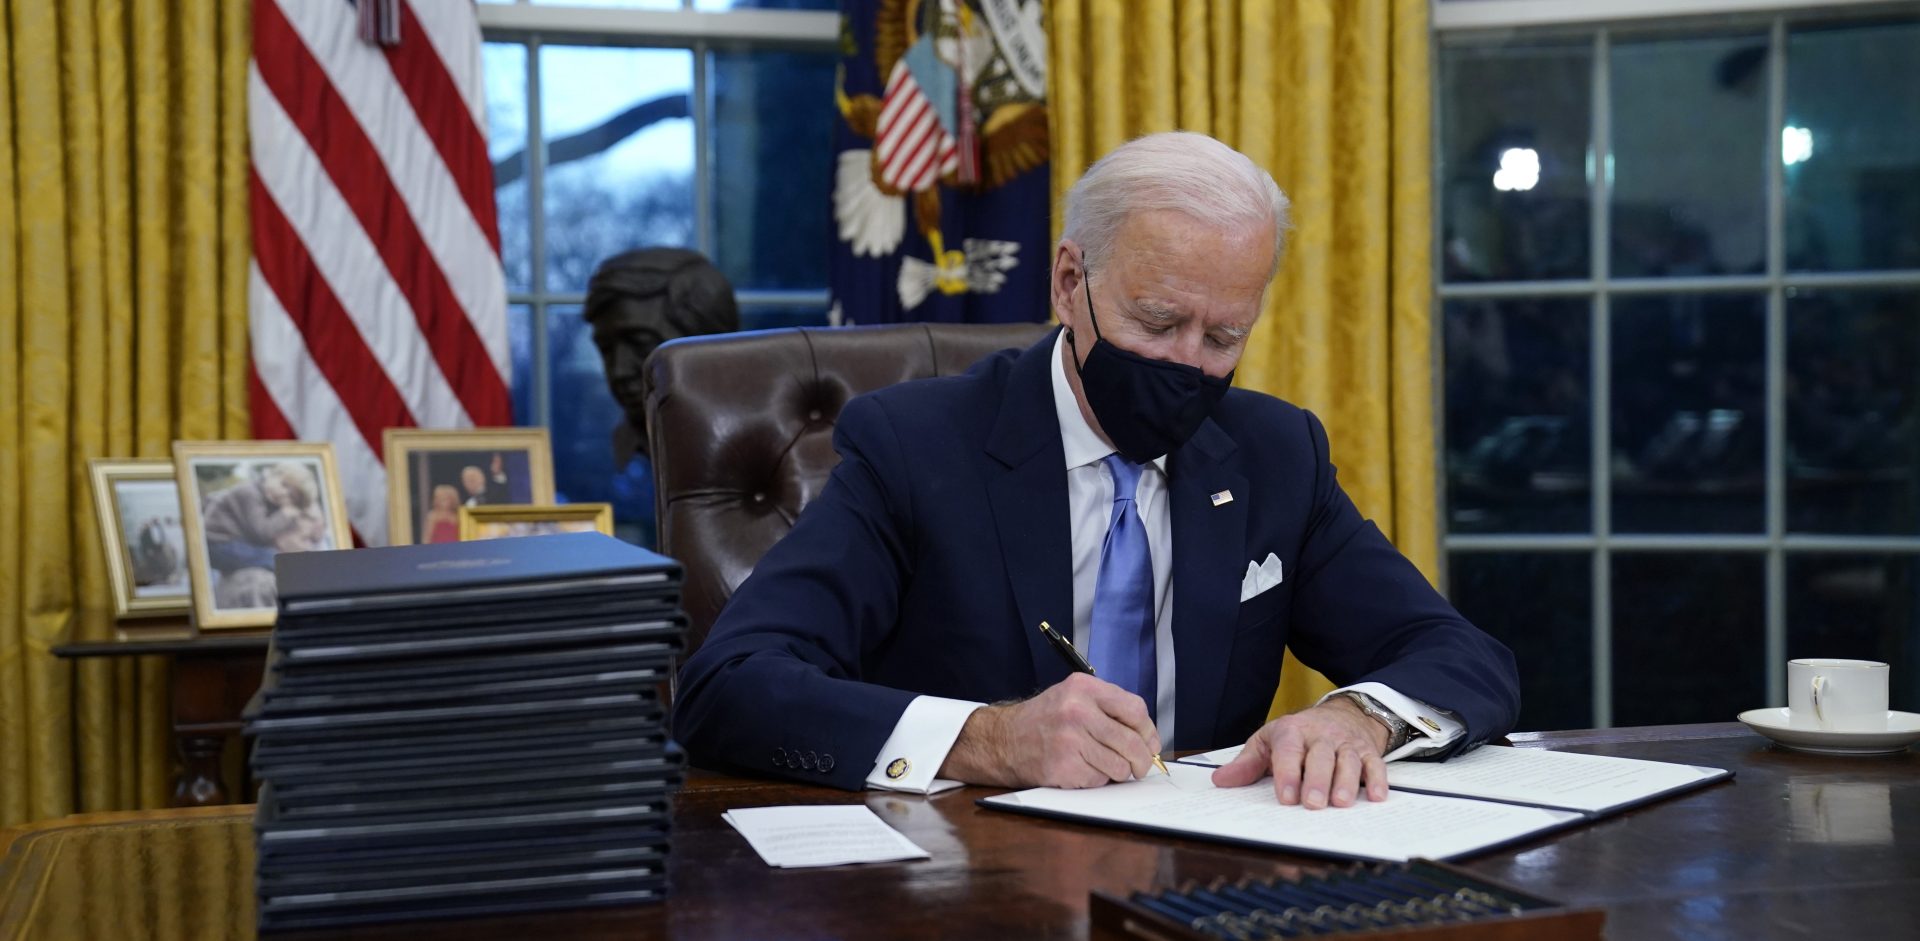 President Joe Biden signs his first executive order in the Oval Office of the White House on Wednesday, Jan. 20, 2021, in Washington.